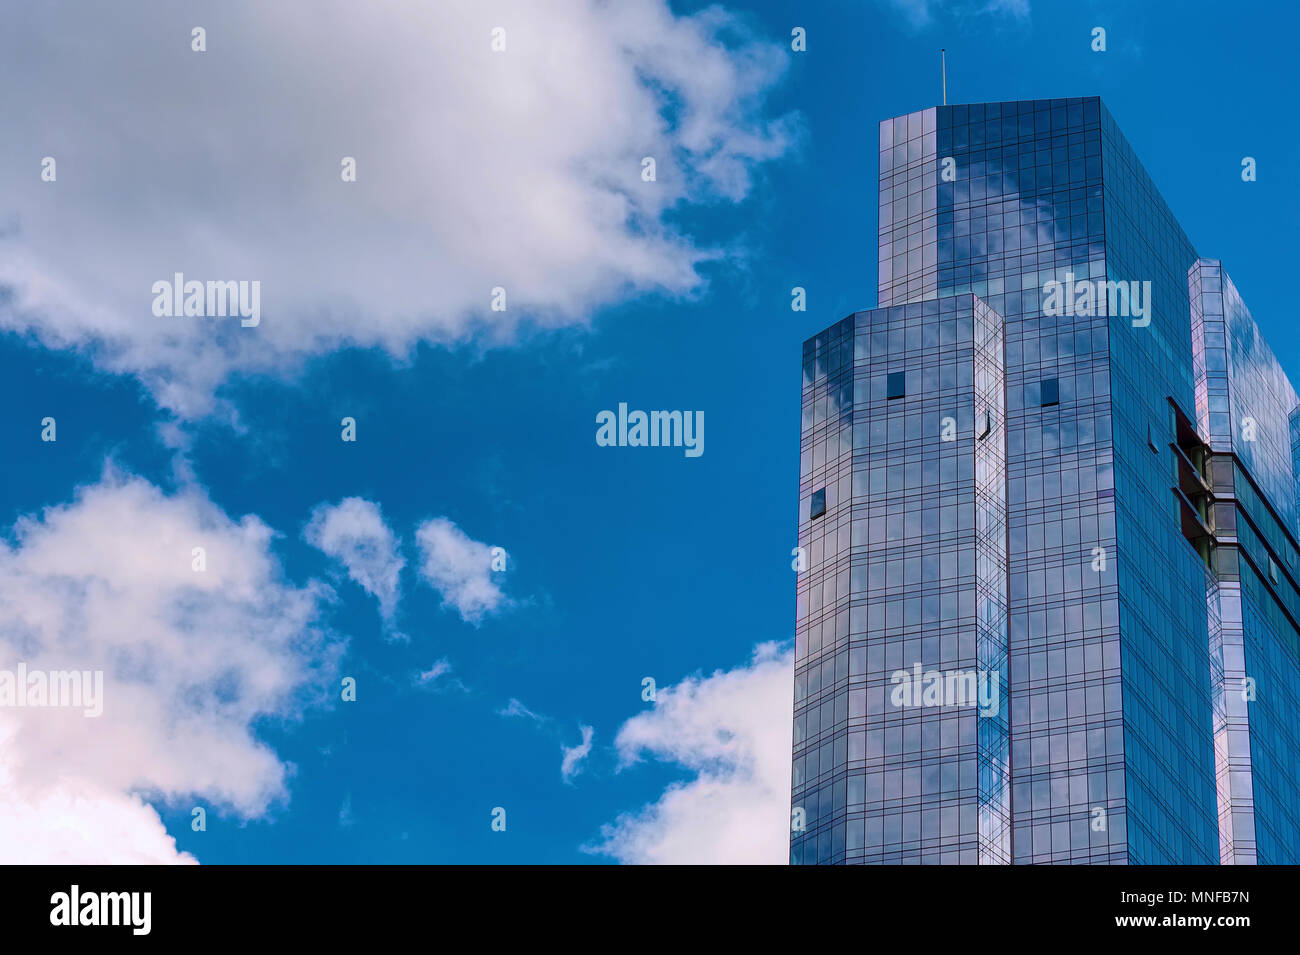 Boston, Massachusetts, USA - September 14, 2016:The top half of the Millennium Tower reflects the blue sky and white clouds. Stock Photo